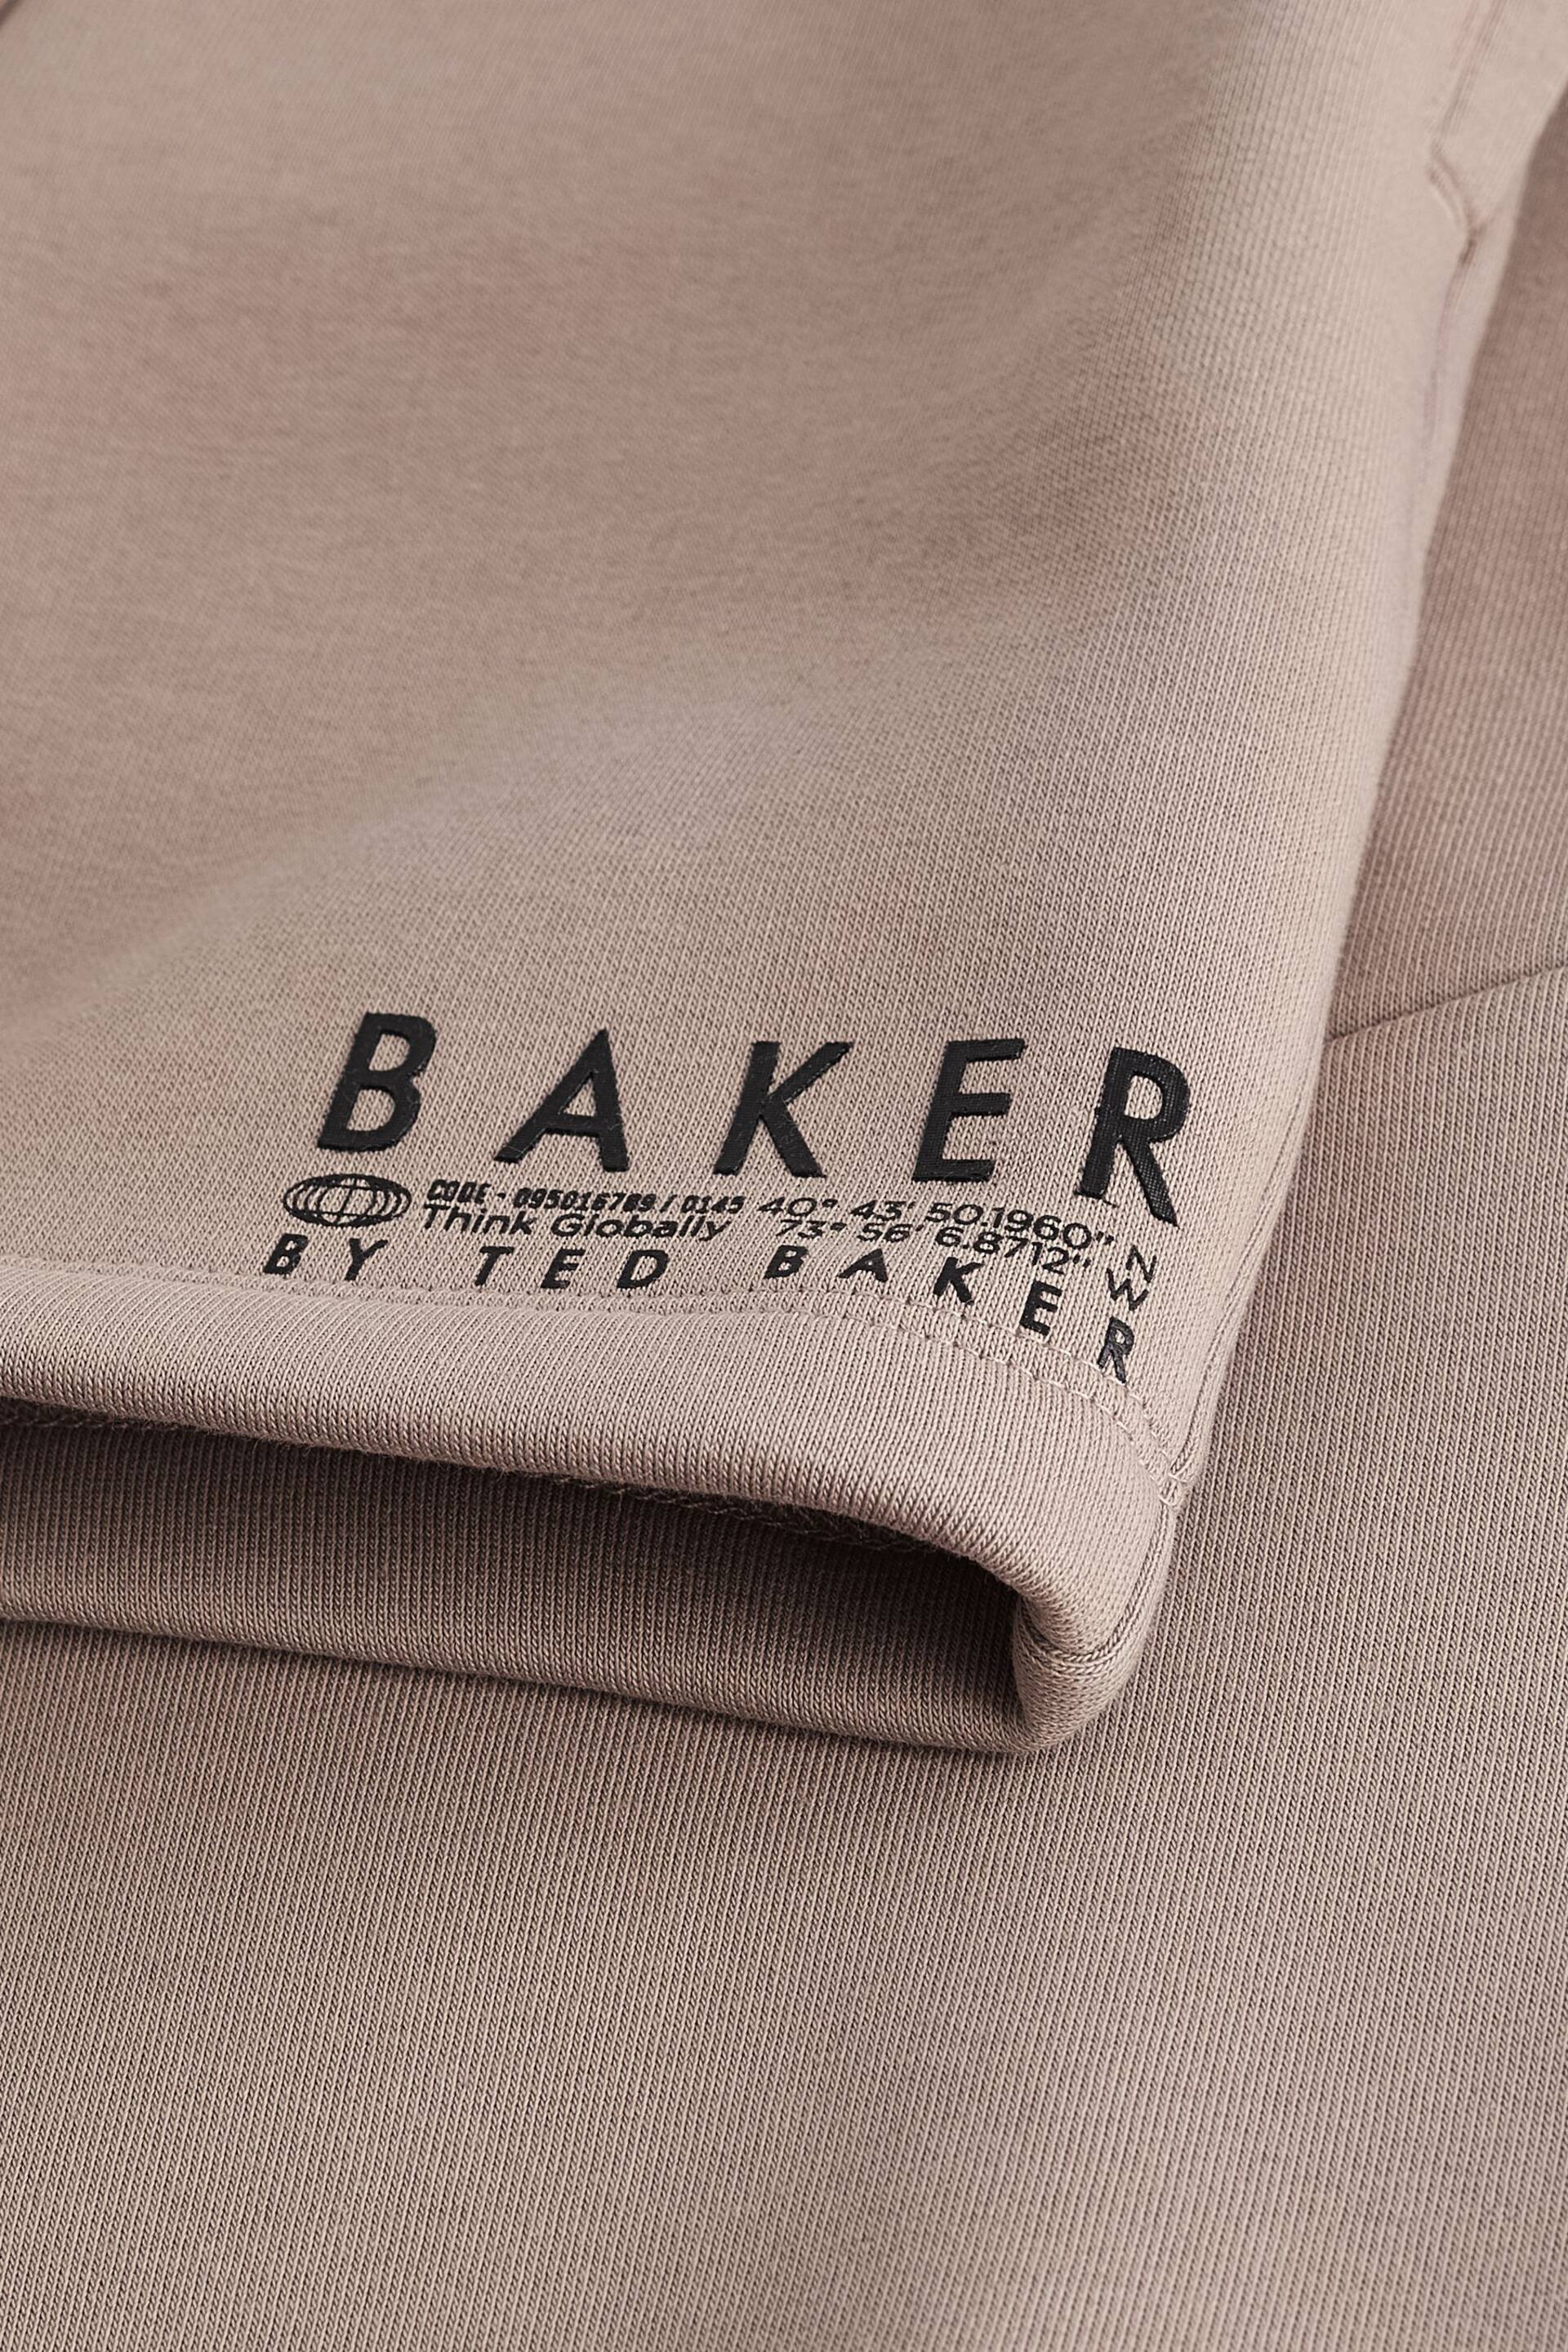 Baker by Ted Baker Seam Sweatshirt and Short Set - Image 16 of 16